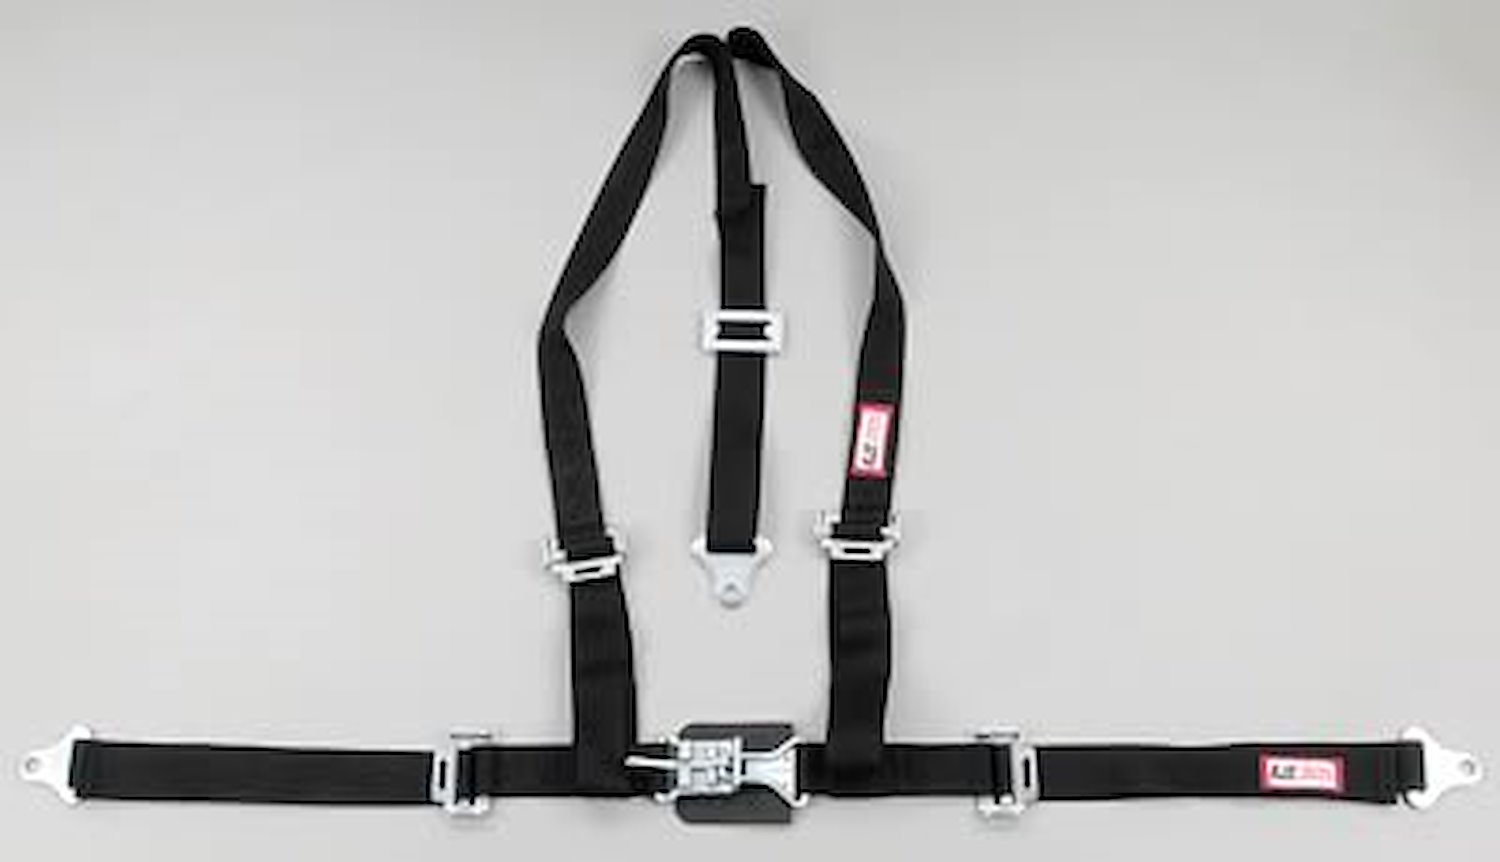 NON-SFI L&L HARNESS 3 PULL UP Lap Belt w/Adjuster SNAP 2 S.H. Y FLOOR Mount WRAP/SNAP YELLOW